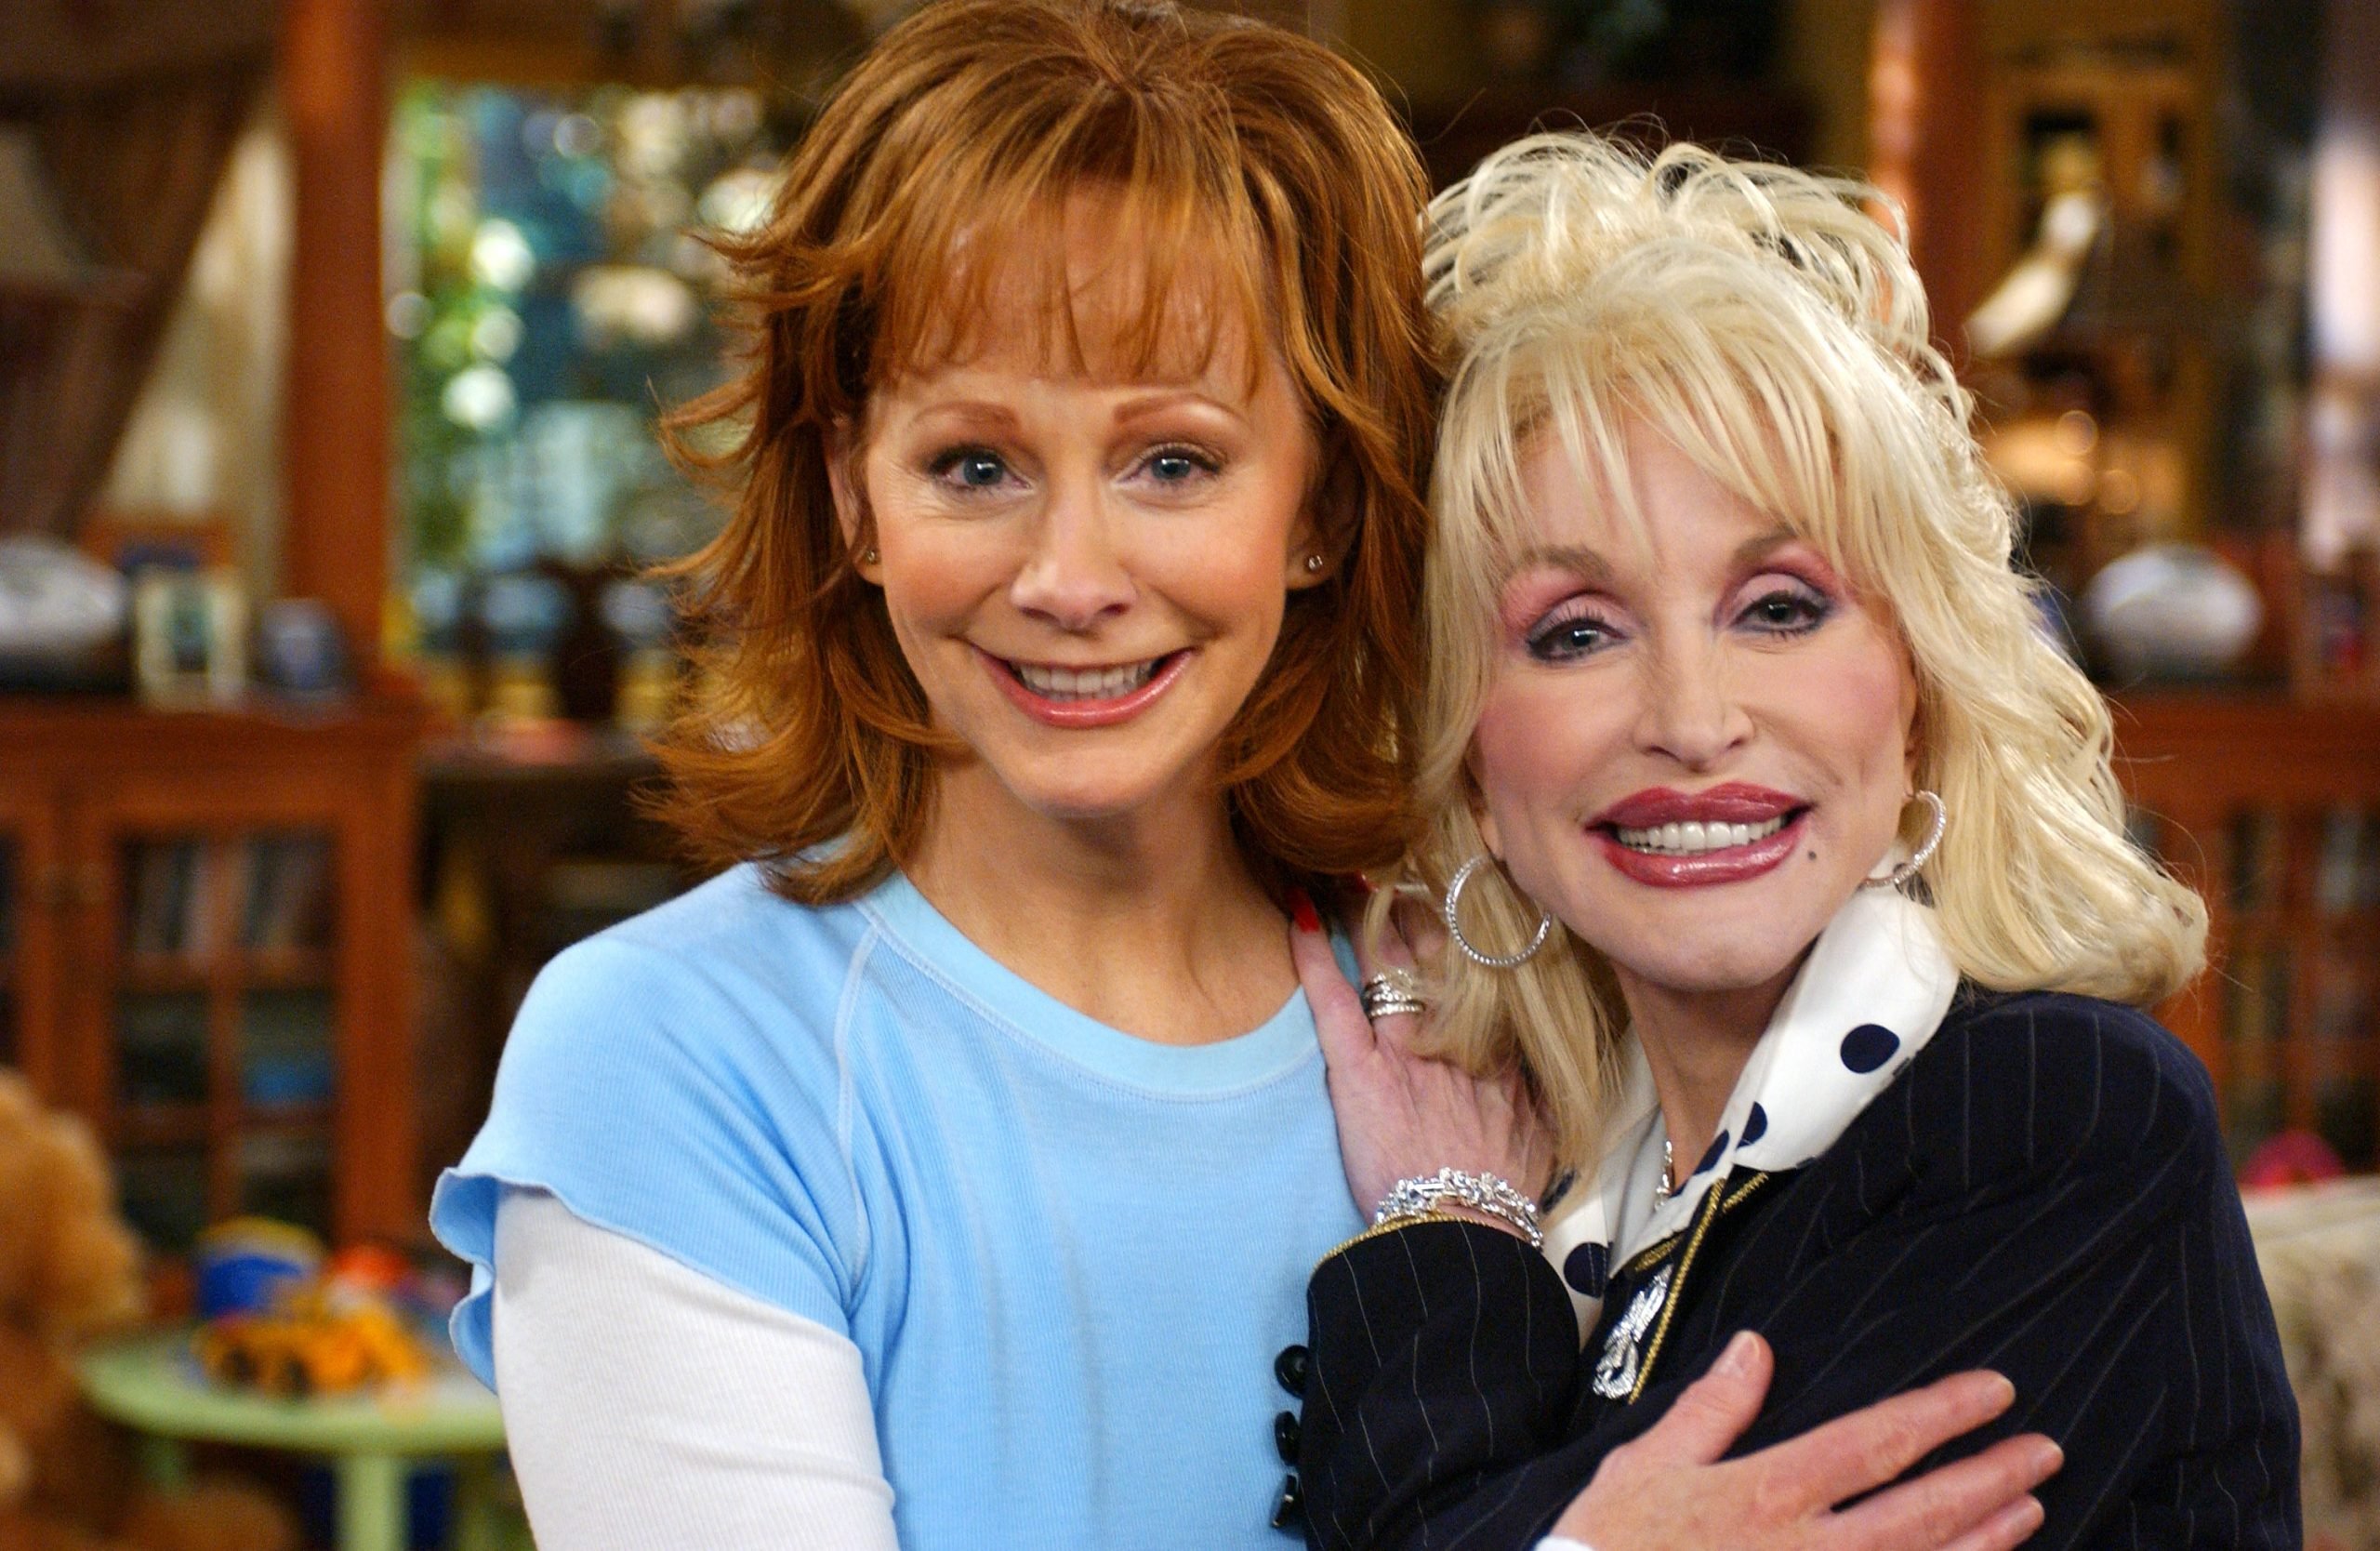 Dolly Parton and Reba McEntire Which Country Singer Has the Higher Net